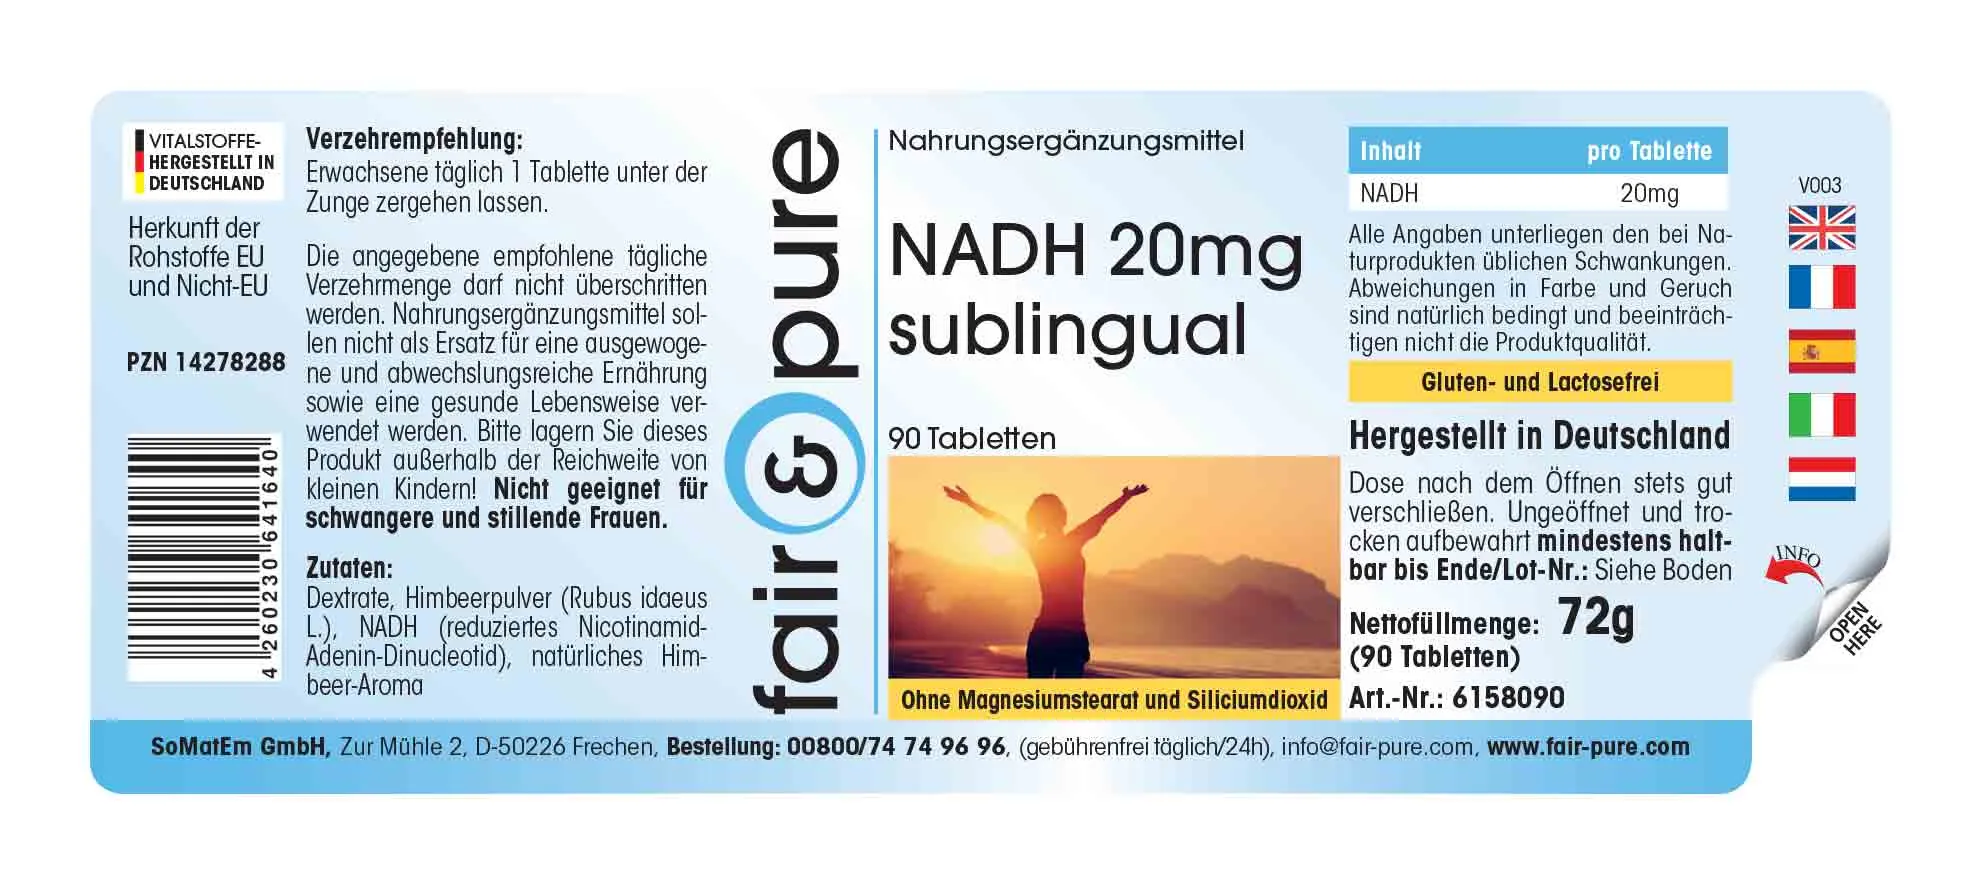 NADH 20mg sublinguale